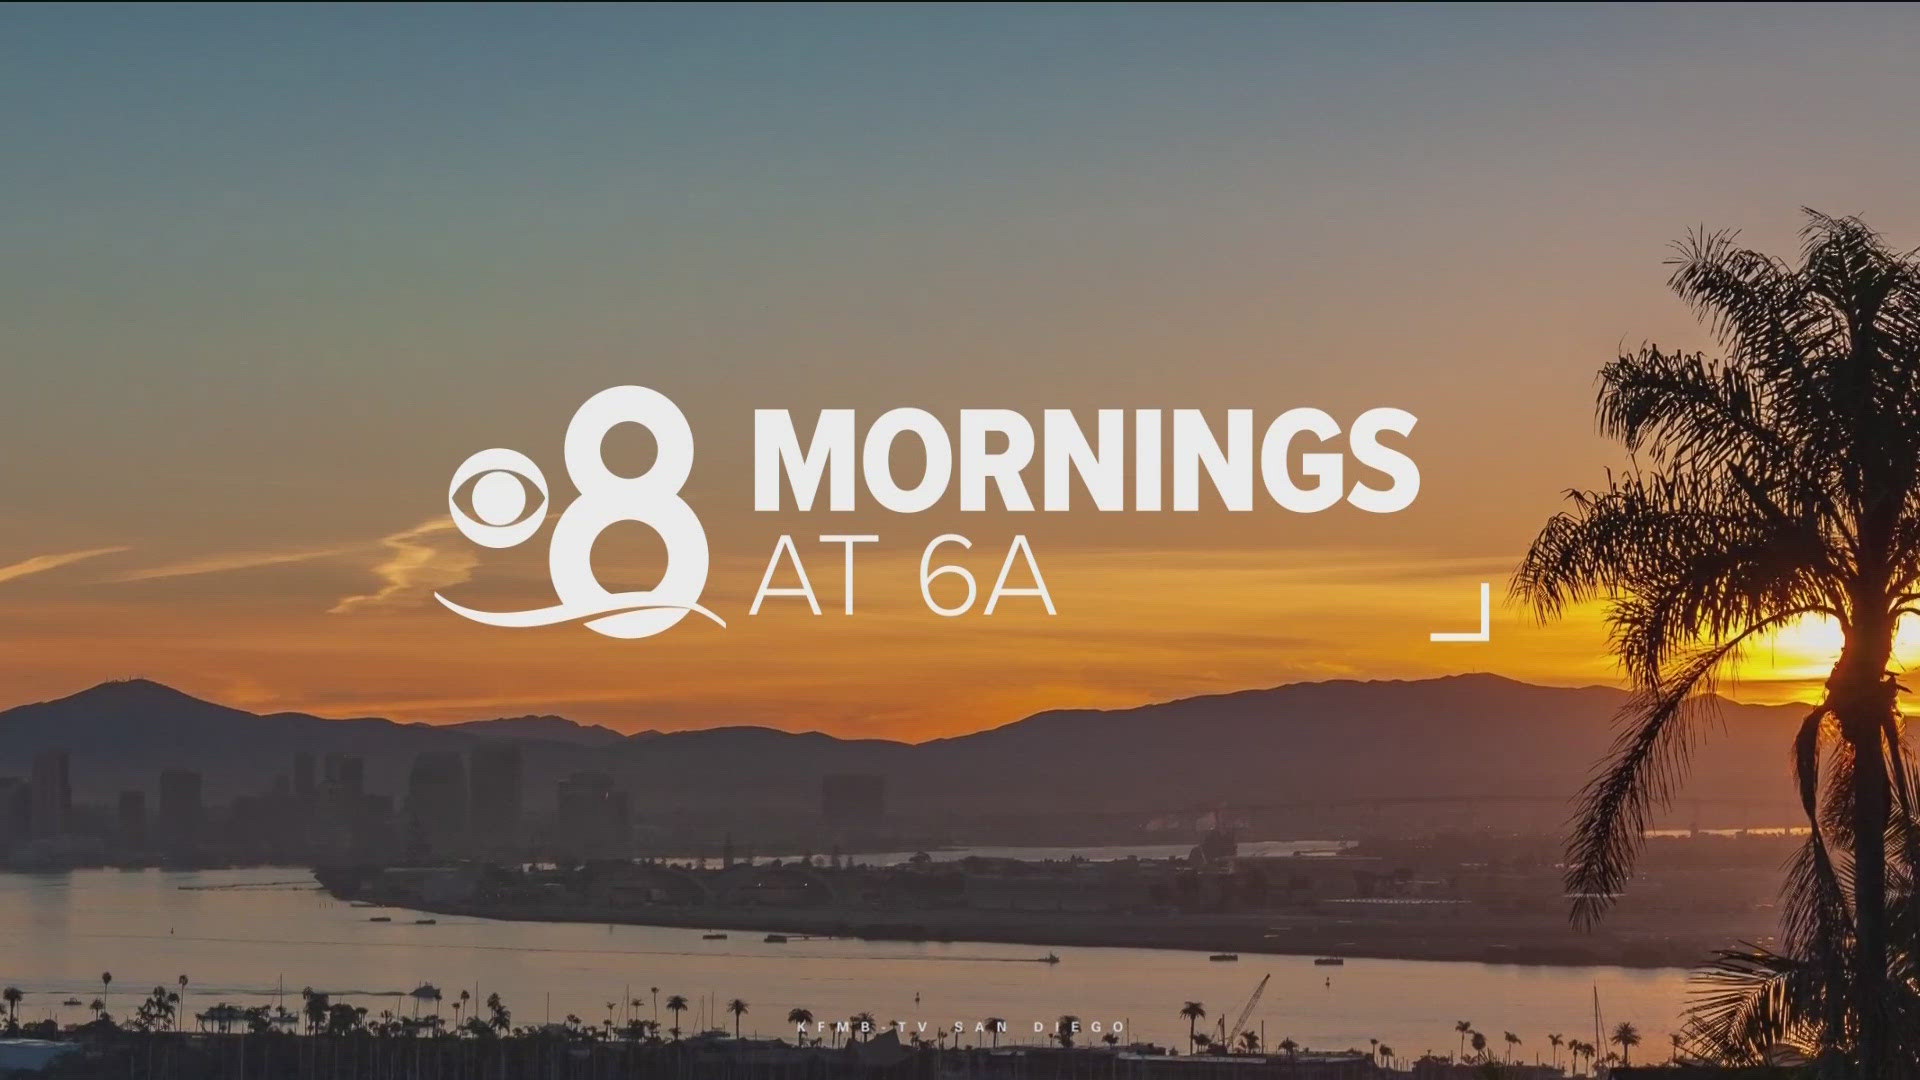 Here are the top stories around San Diego County for the morning of Thursday, May 9th.
For the latest news, weather and sports, head to:
https://www.cbs8.com/